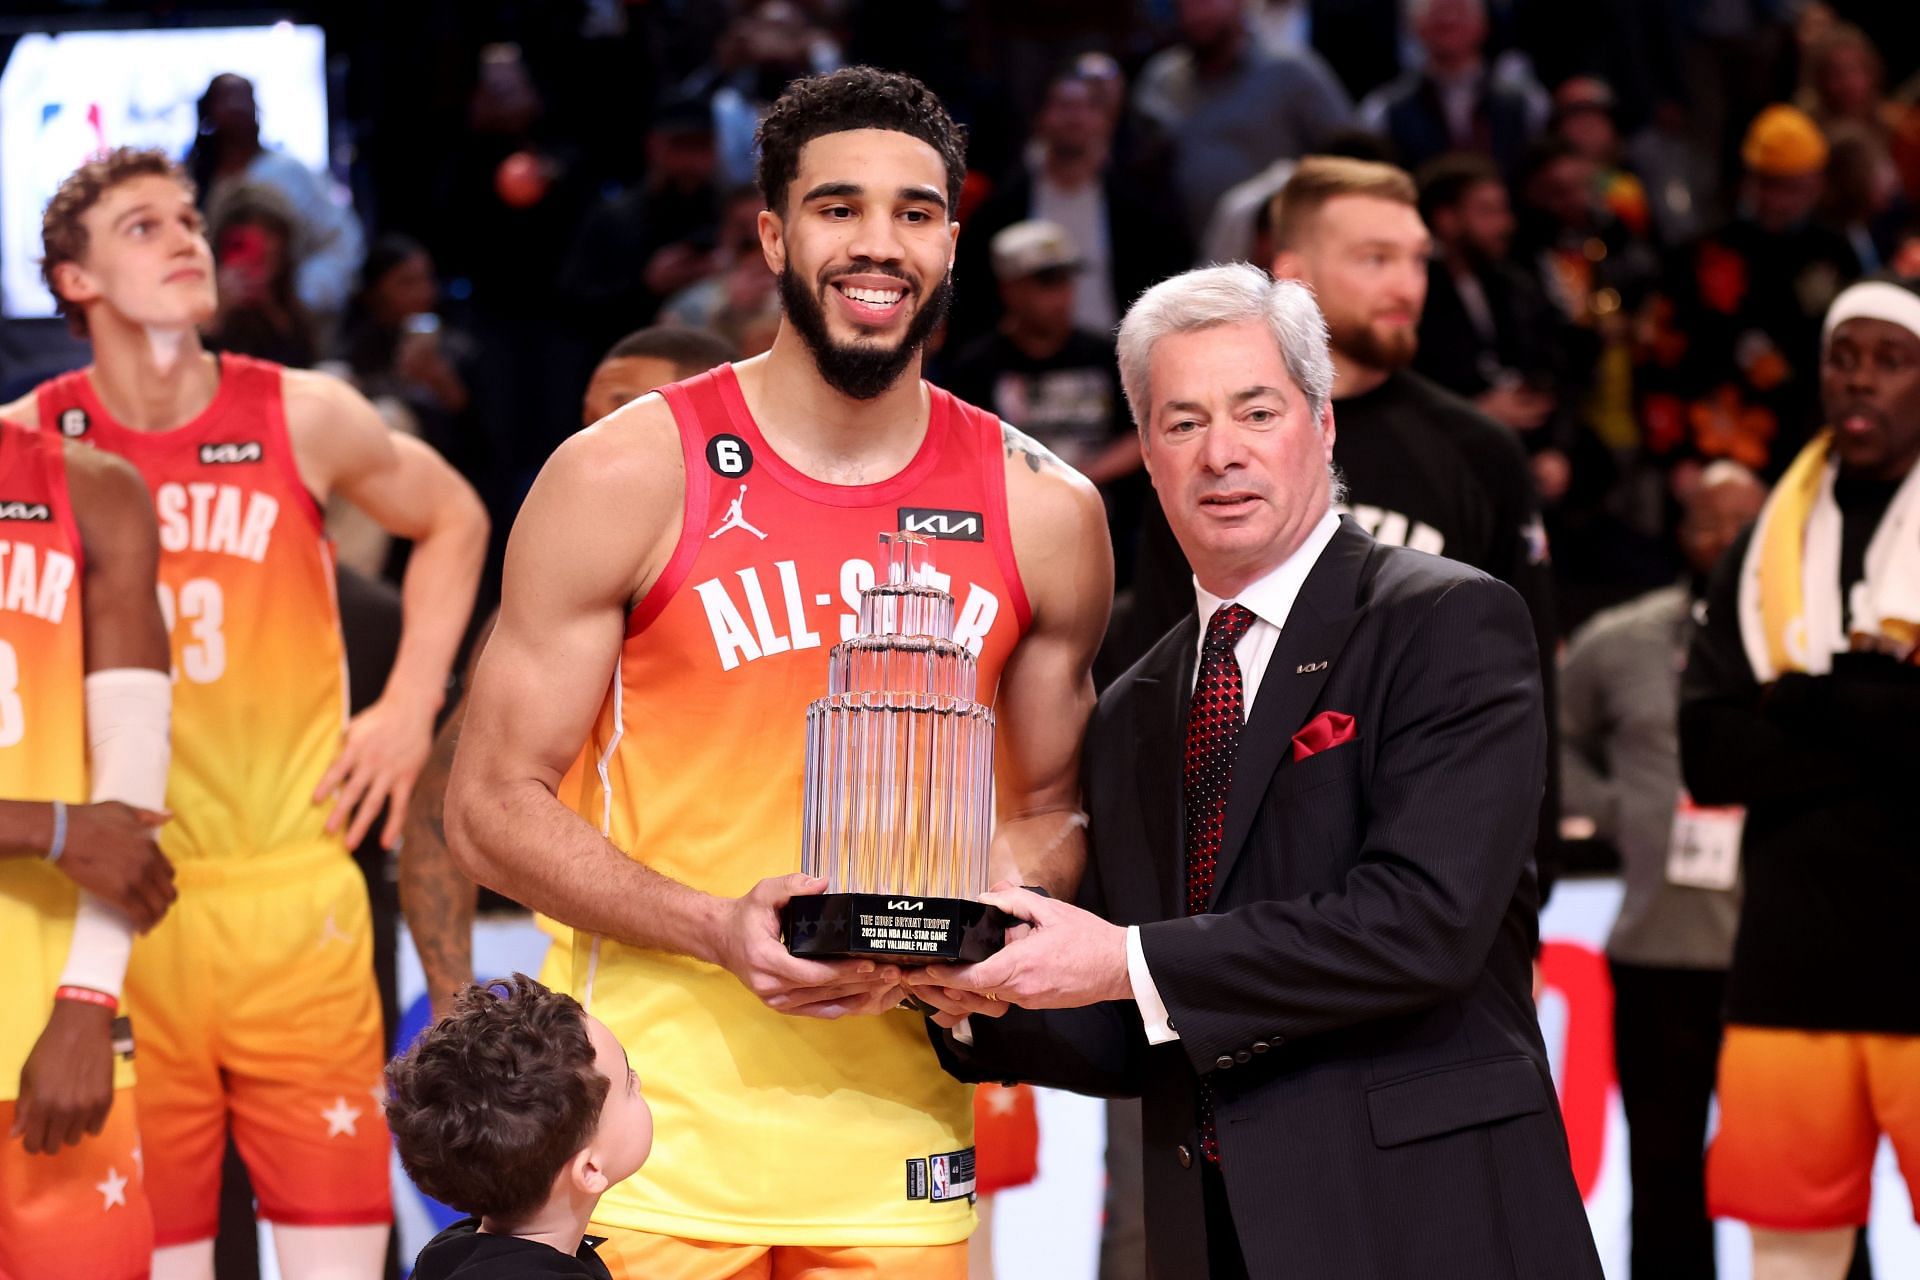 NBA All-Star History: Game recaps, box scores, rosters, MVPs and